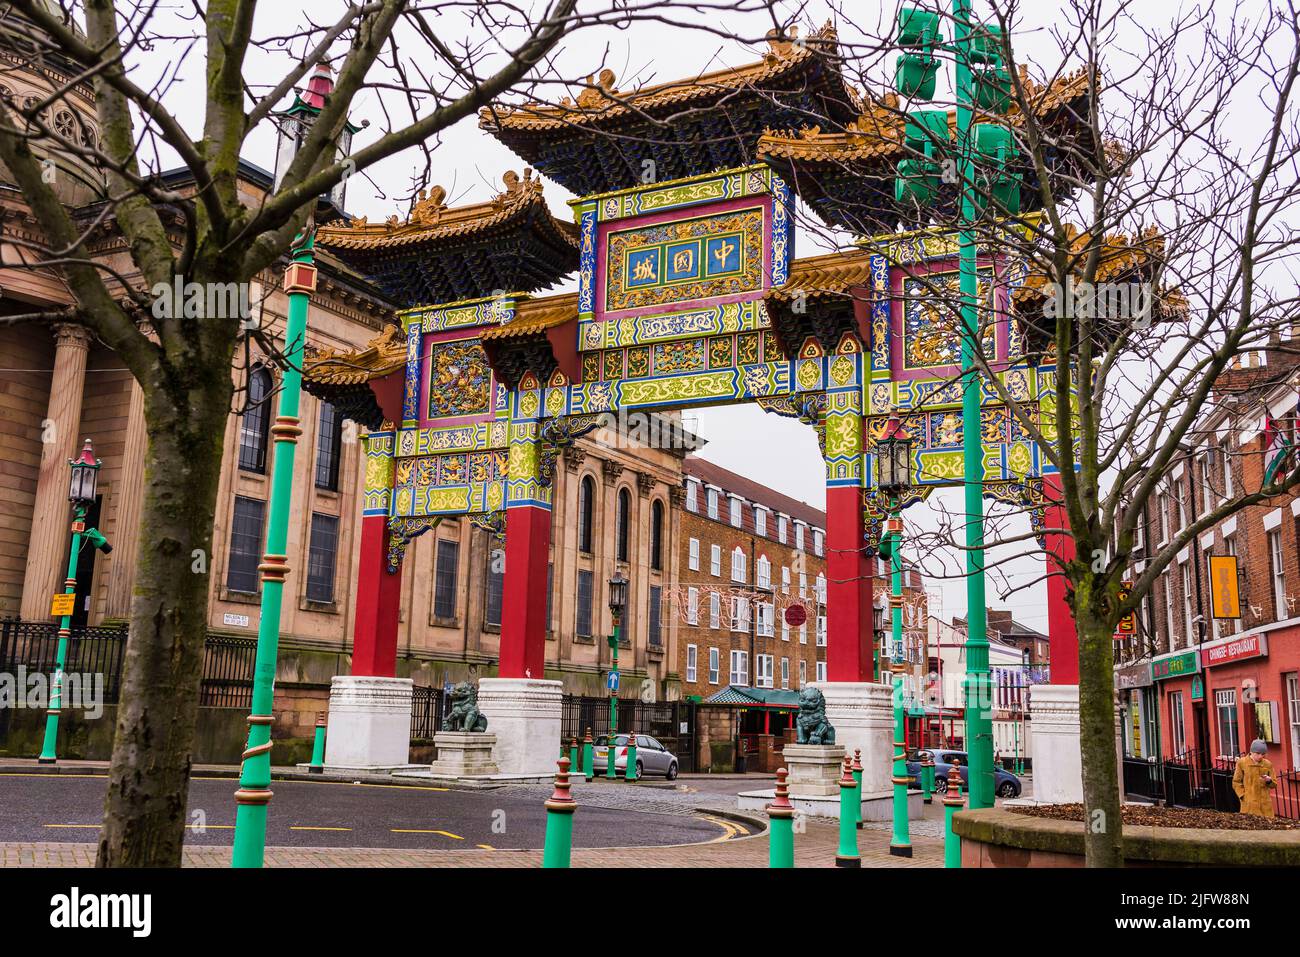 Chinatown Gate, Nelson Street. Chinatown is an area of Liverpool that is an ethnic enclave home to the oldest Chinese community in Europe. Liverpool, Stock Photo